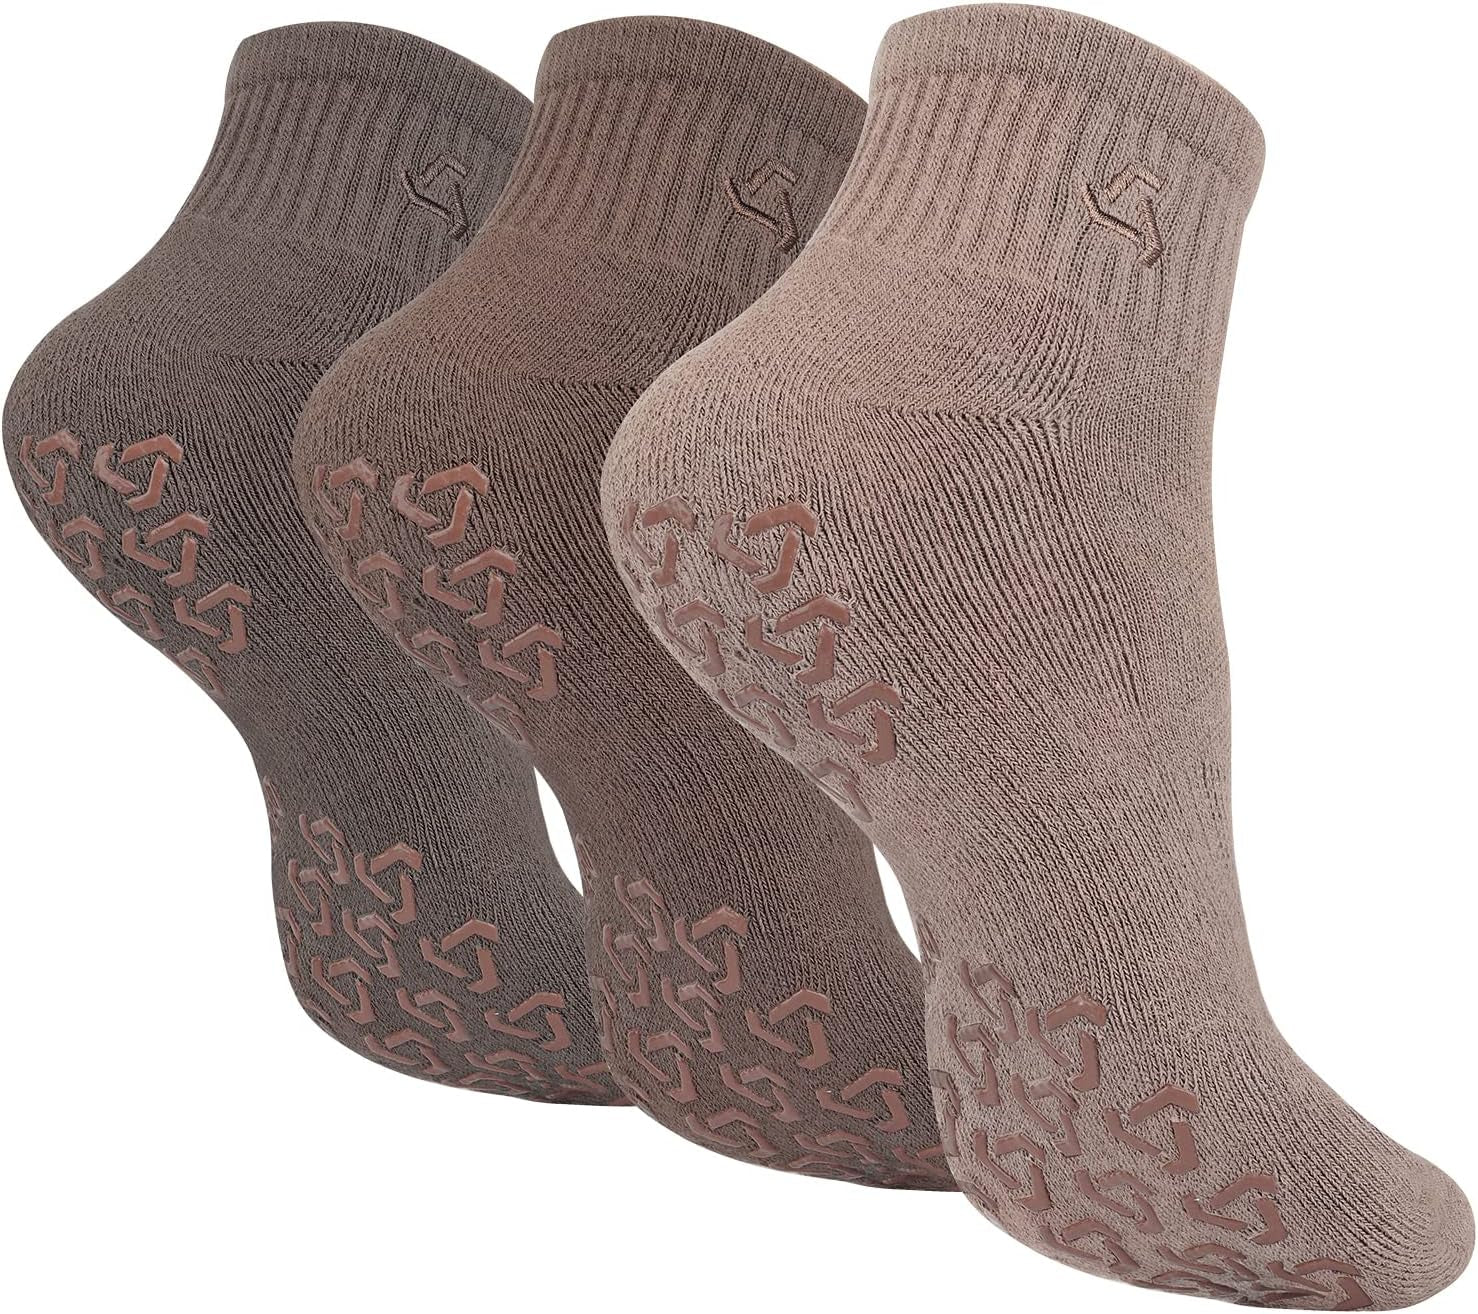 Non Slip Grip Socks for Yoga Home Workout Pure Barre, Pilates, Hospital, Ideal Cushion Socks for Men and Women